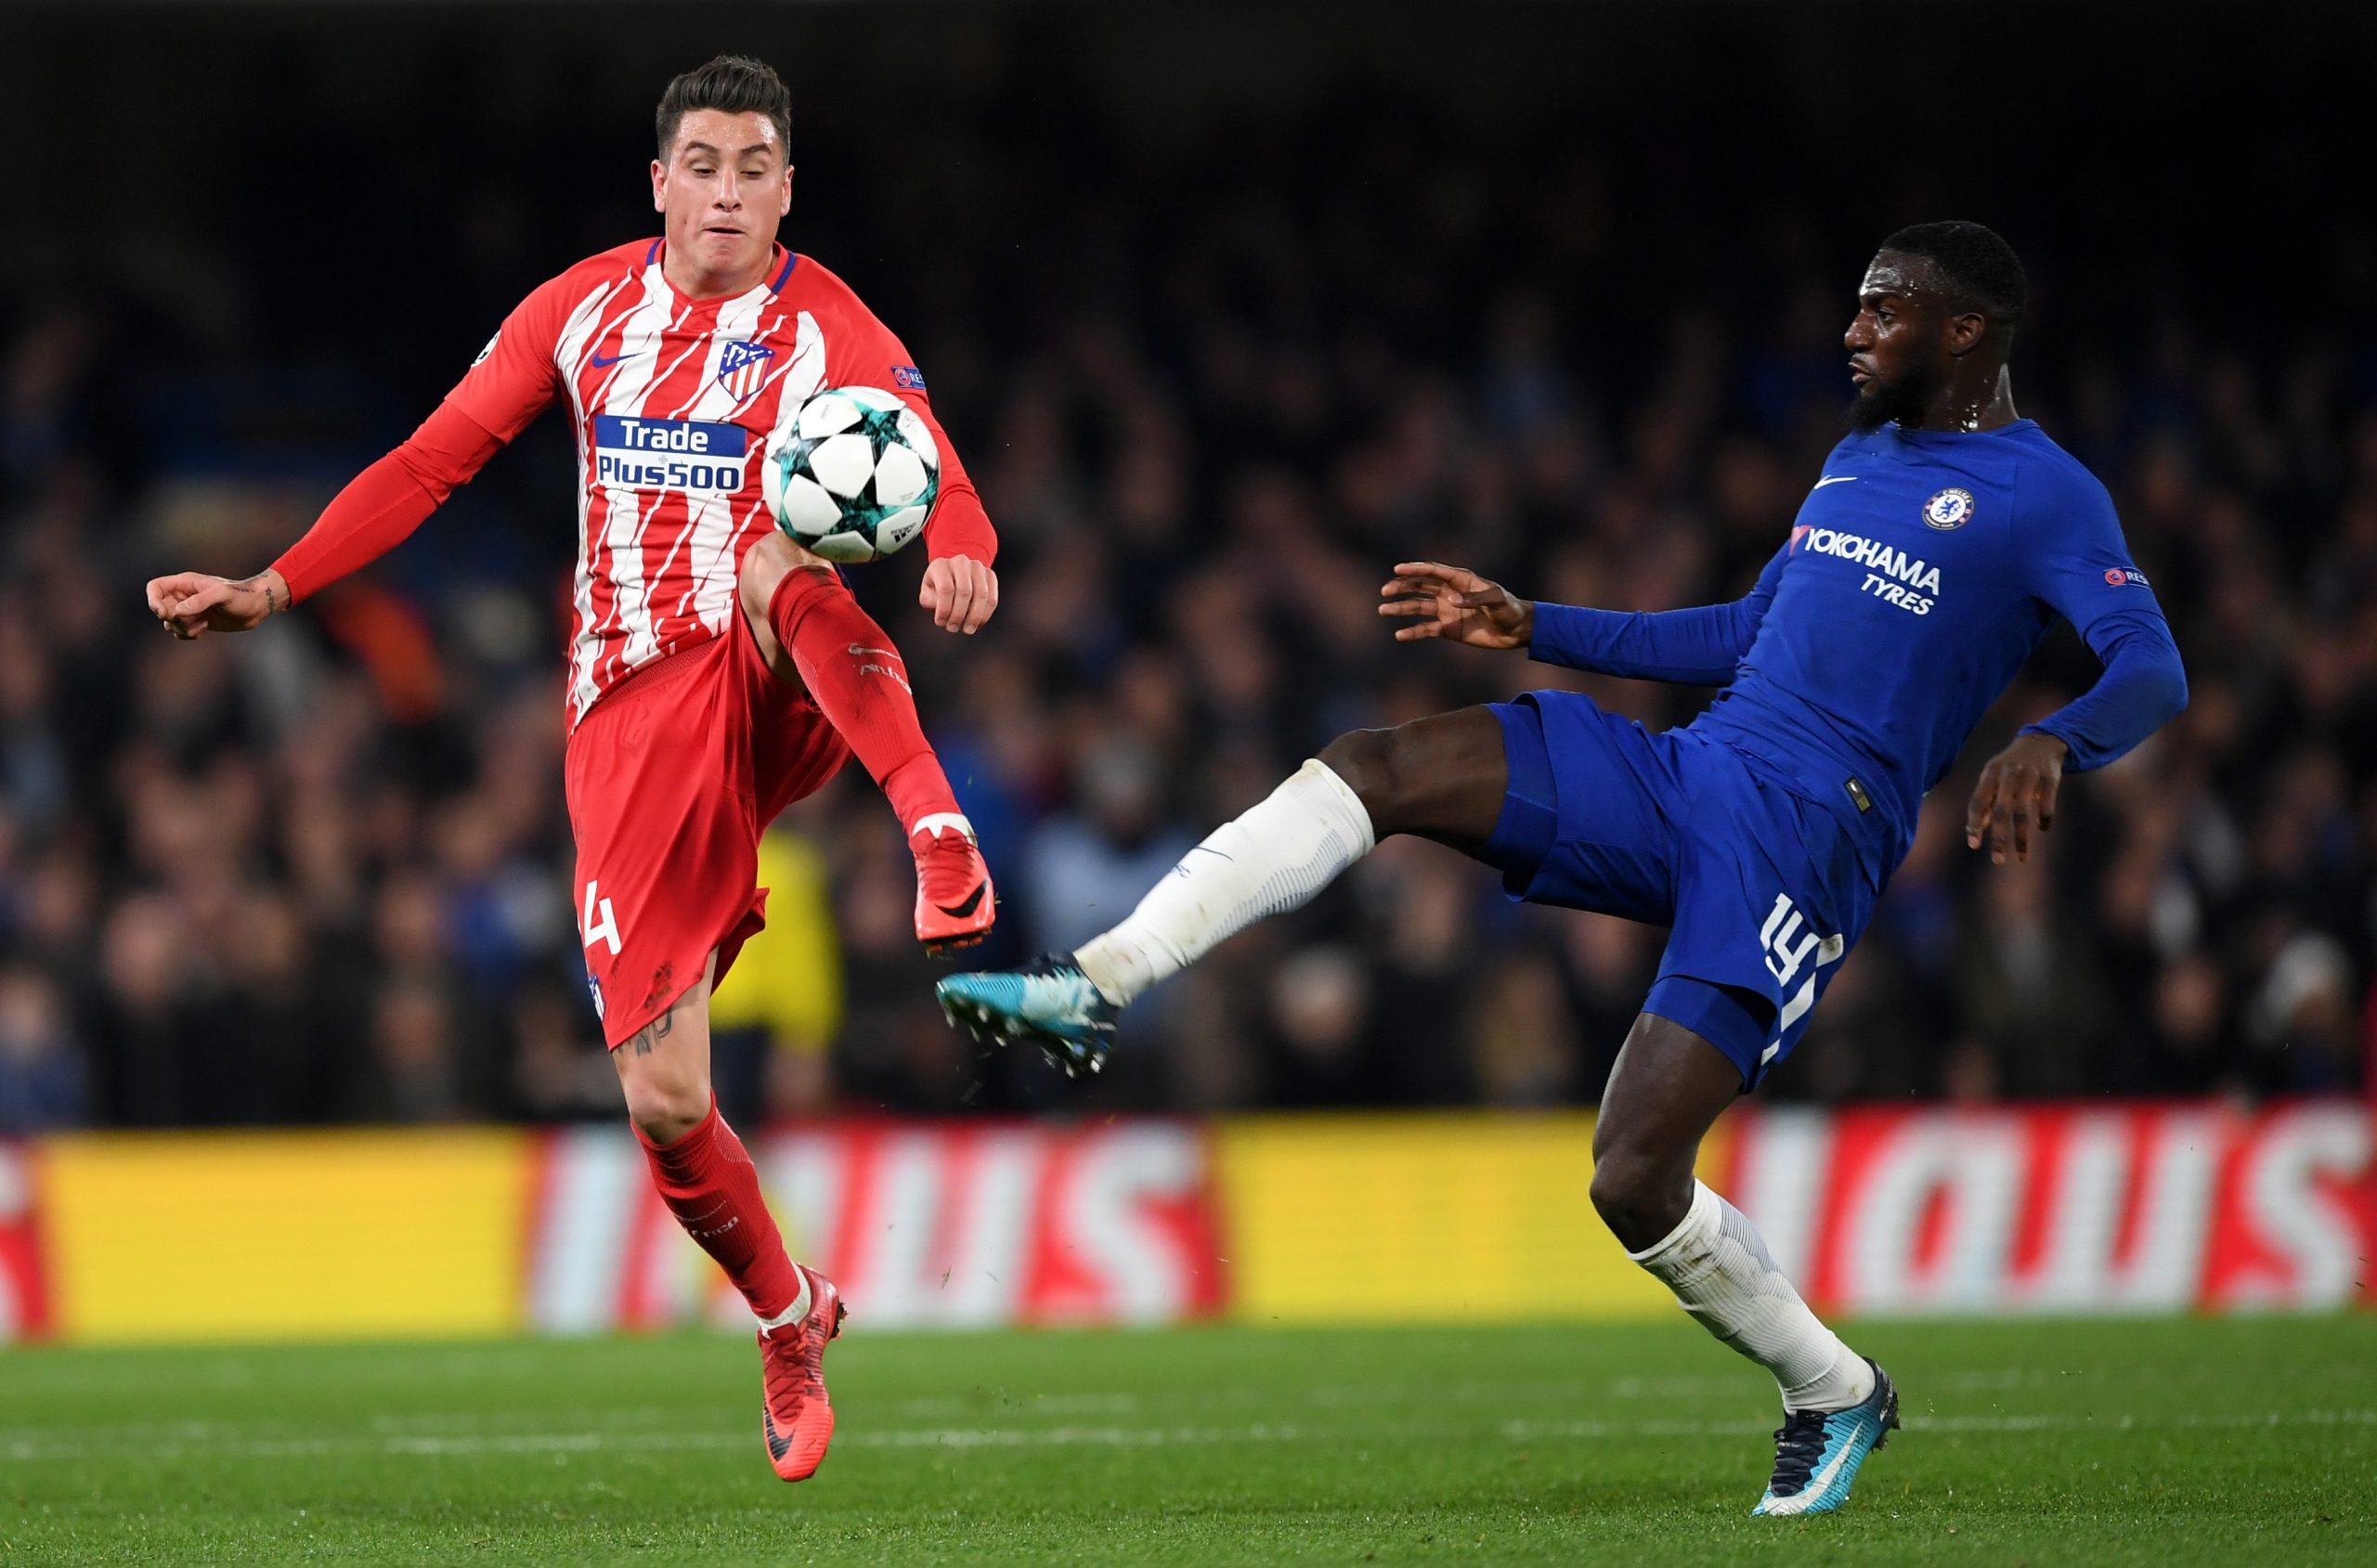 Jose Maria Gimenez is set to miss the Champions League clash against Chelsea due to injury. (GETTY Images)